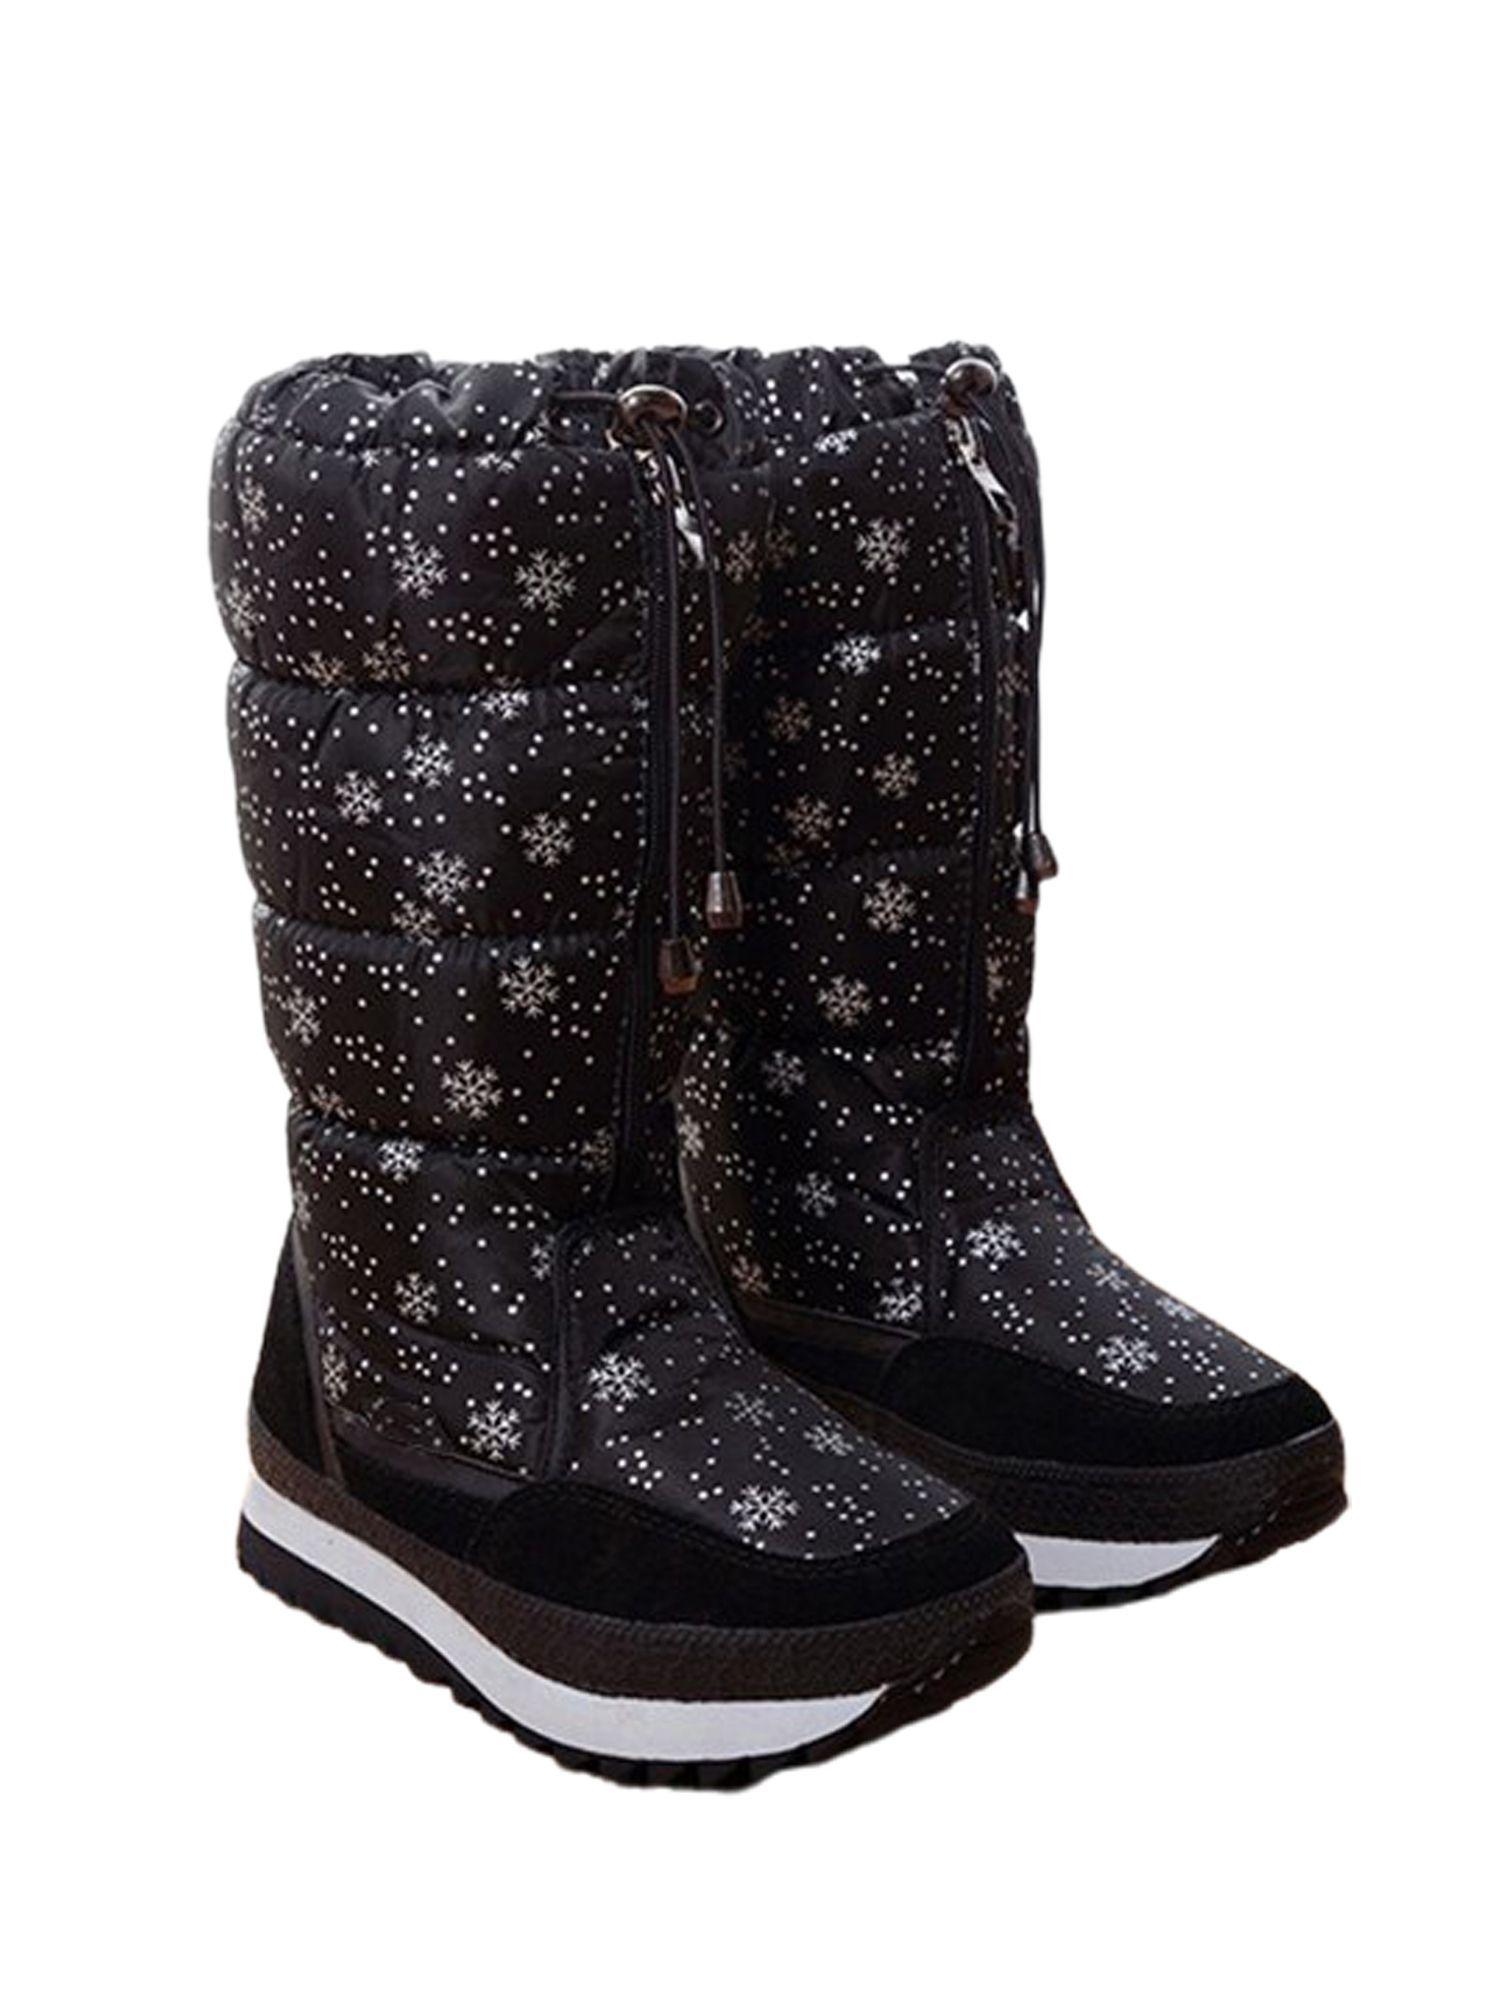 black and silver snowflake girls winter snow boots